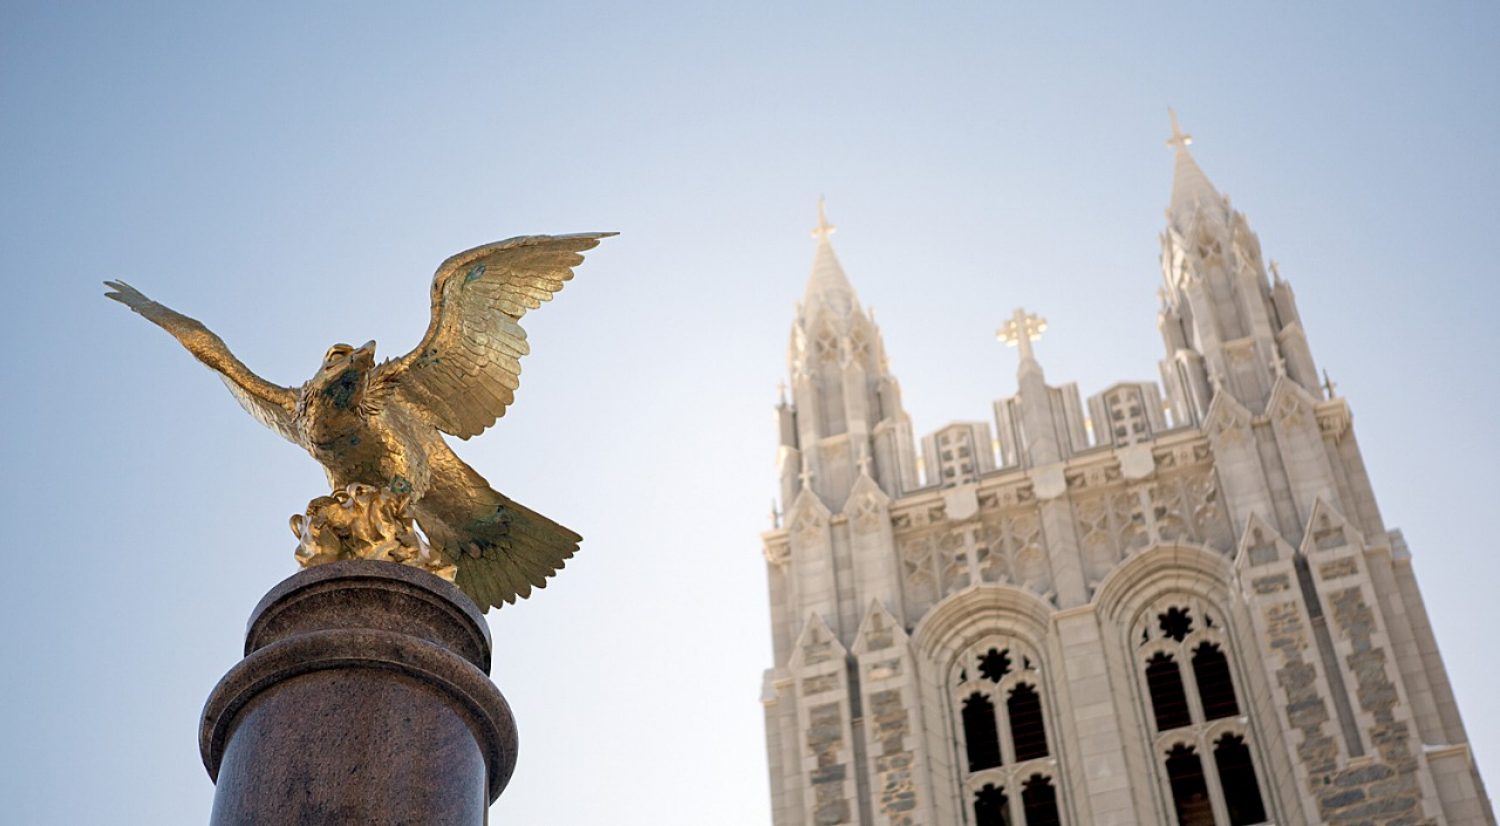 Gasson Tower and eagle statue